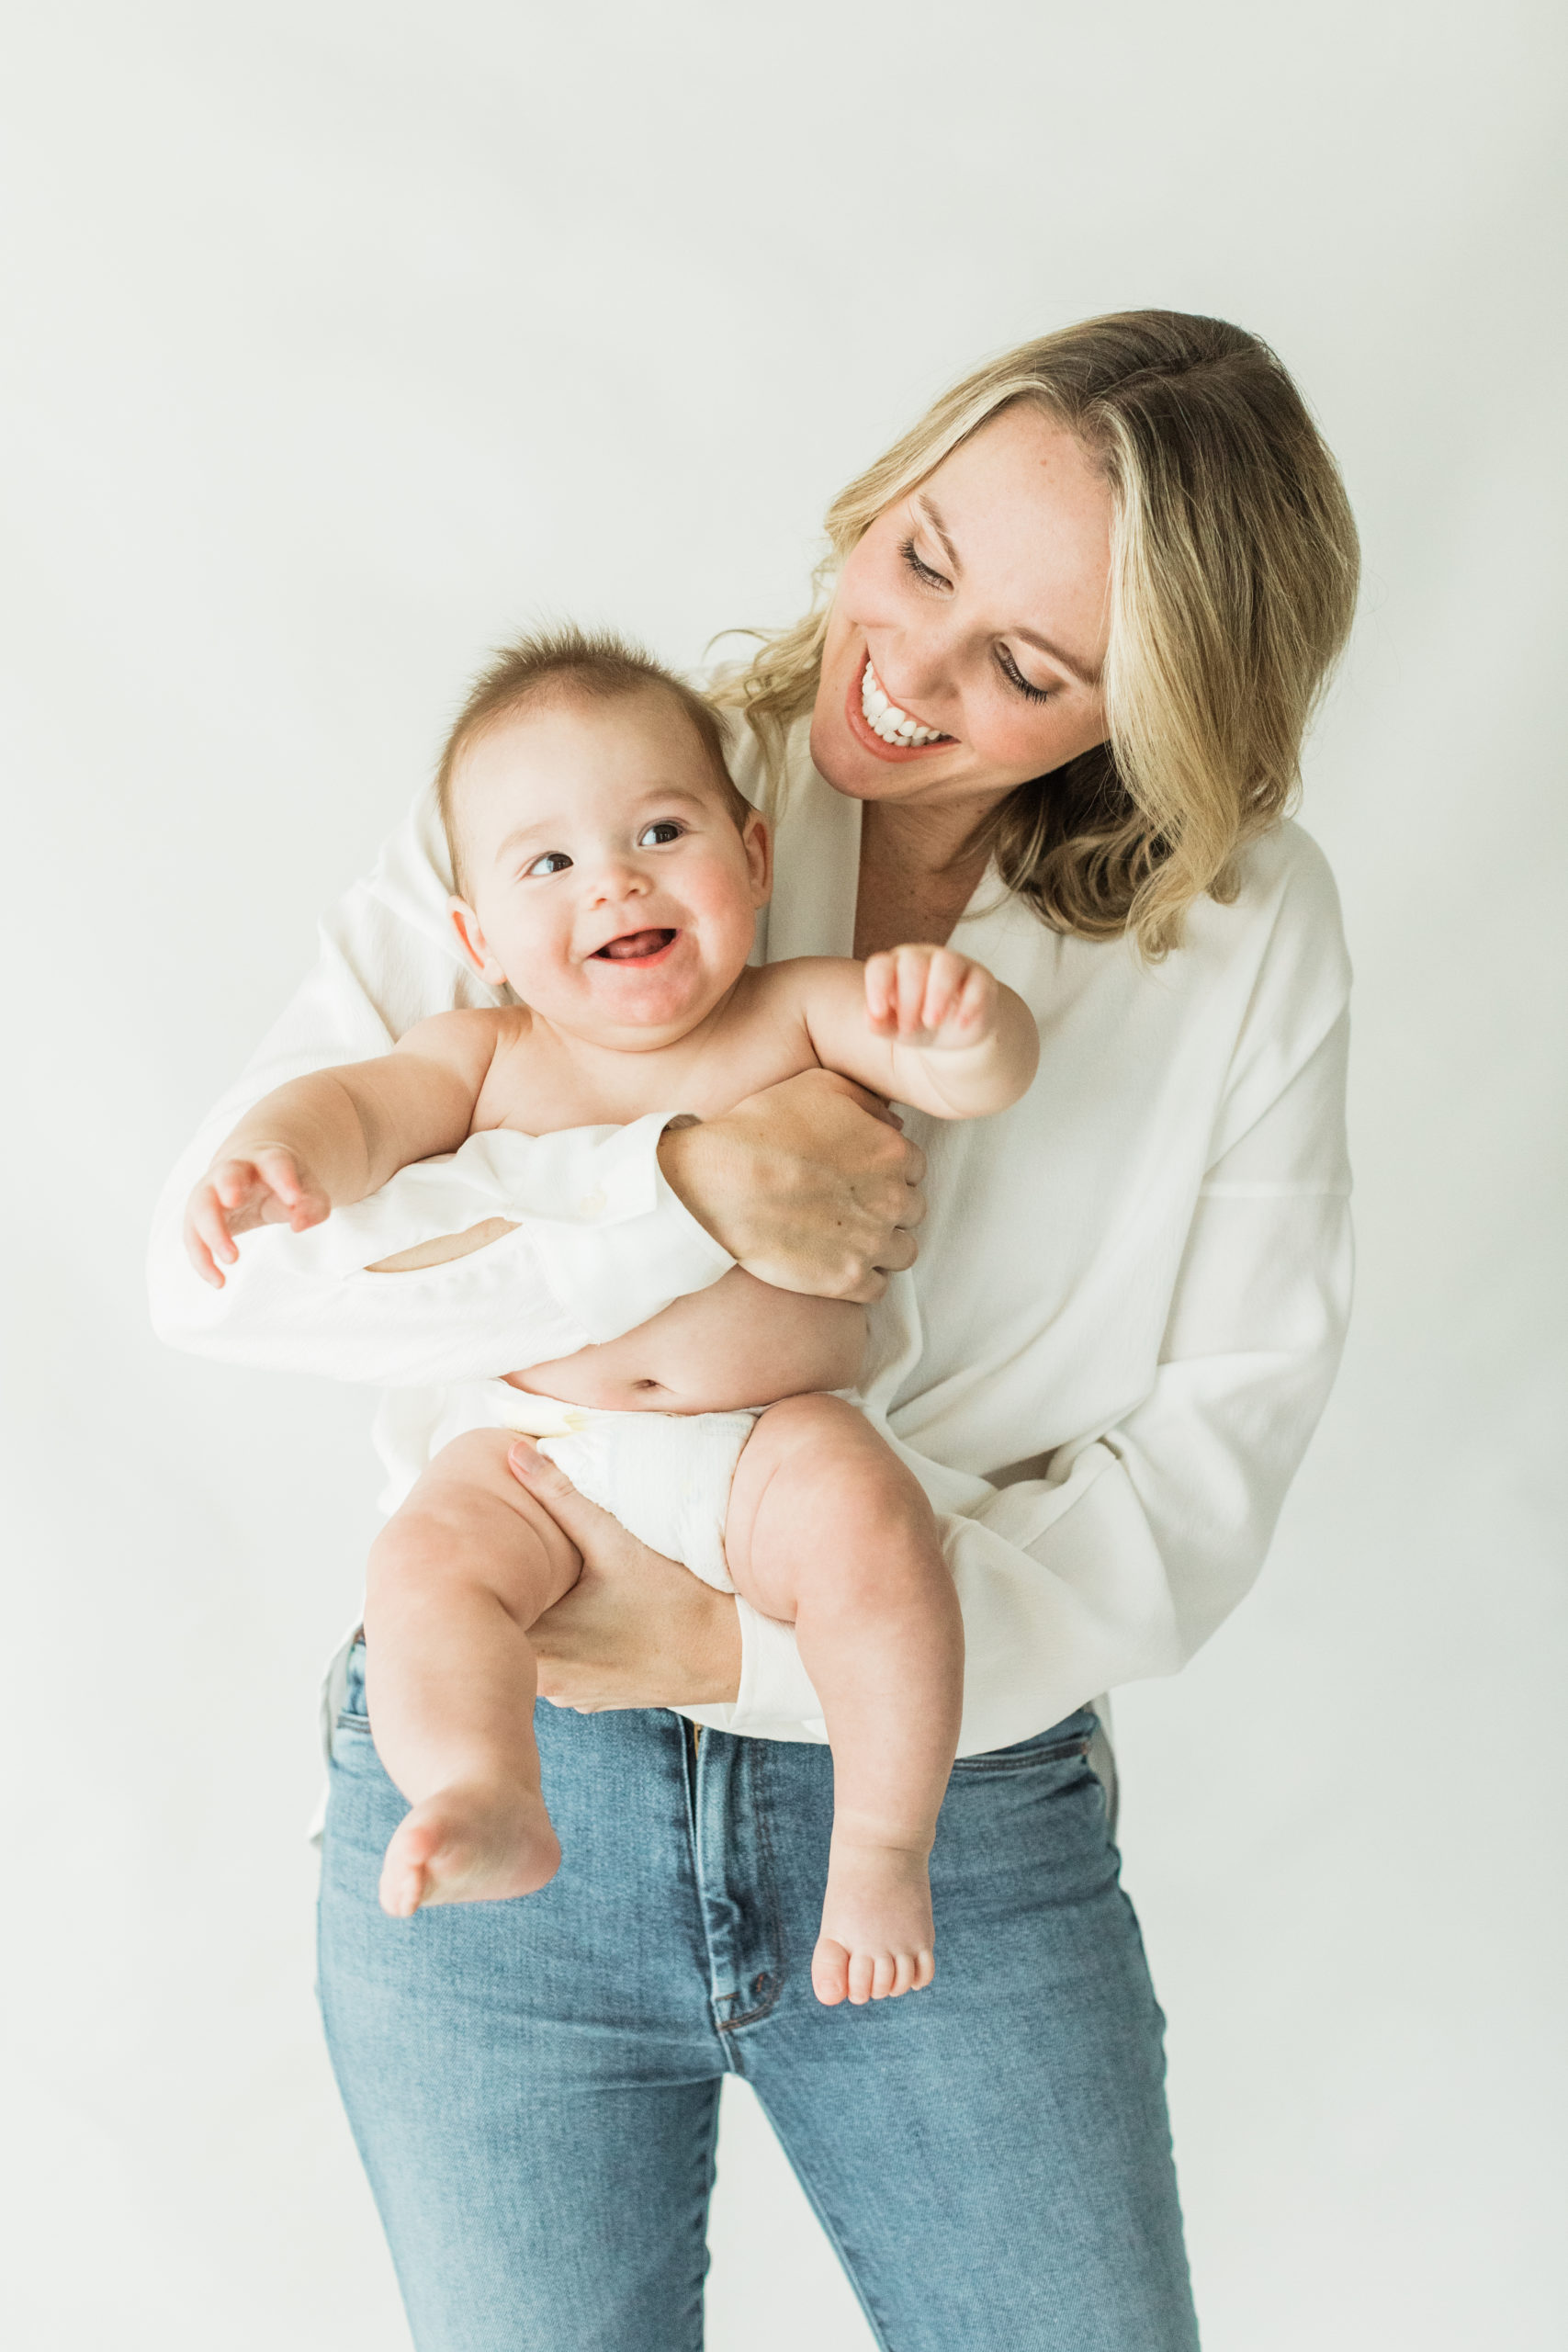 Mom holding her 6 month old baby boy. Baby boy in diaper, smiling. Mama in white long sleeve shirt and blue jeans. Natural light photographer.